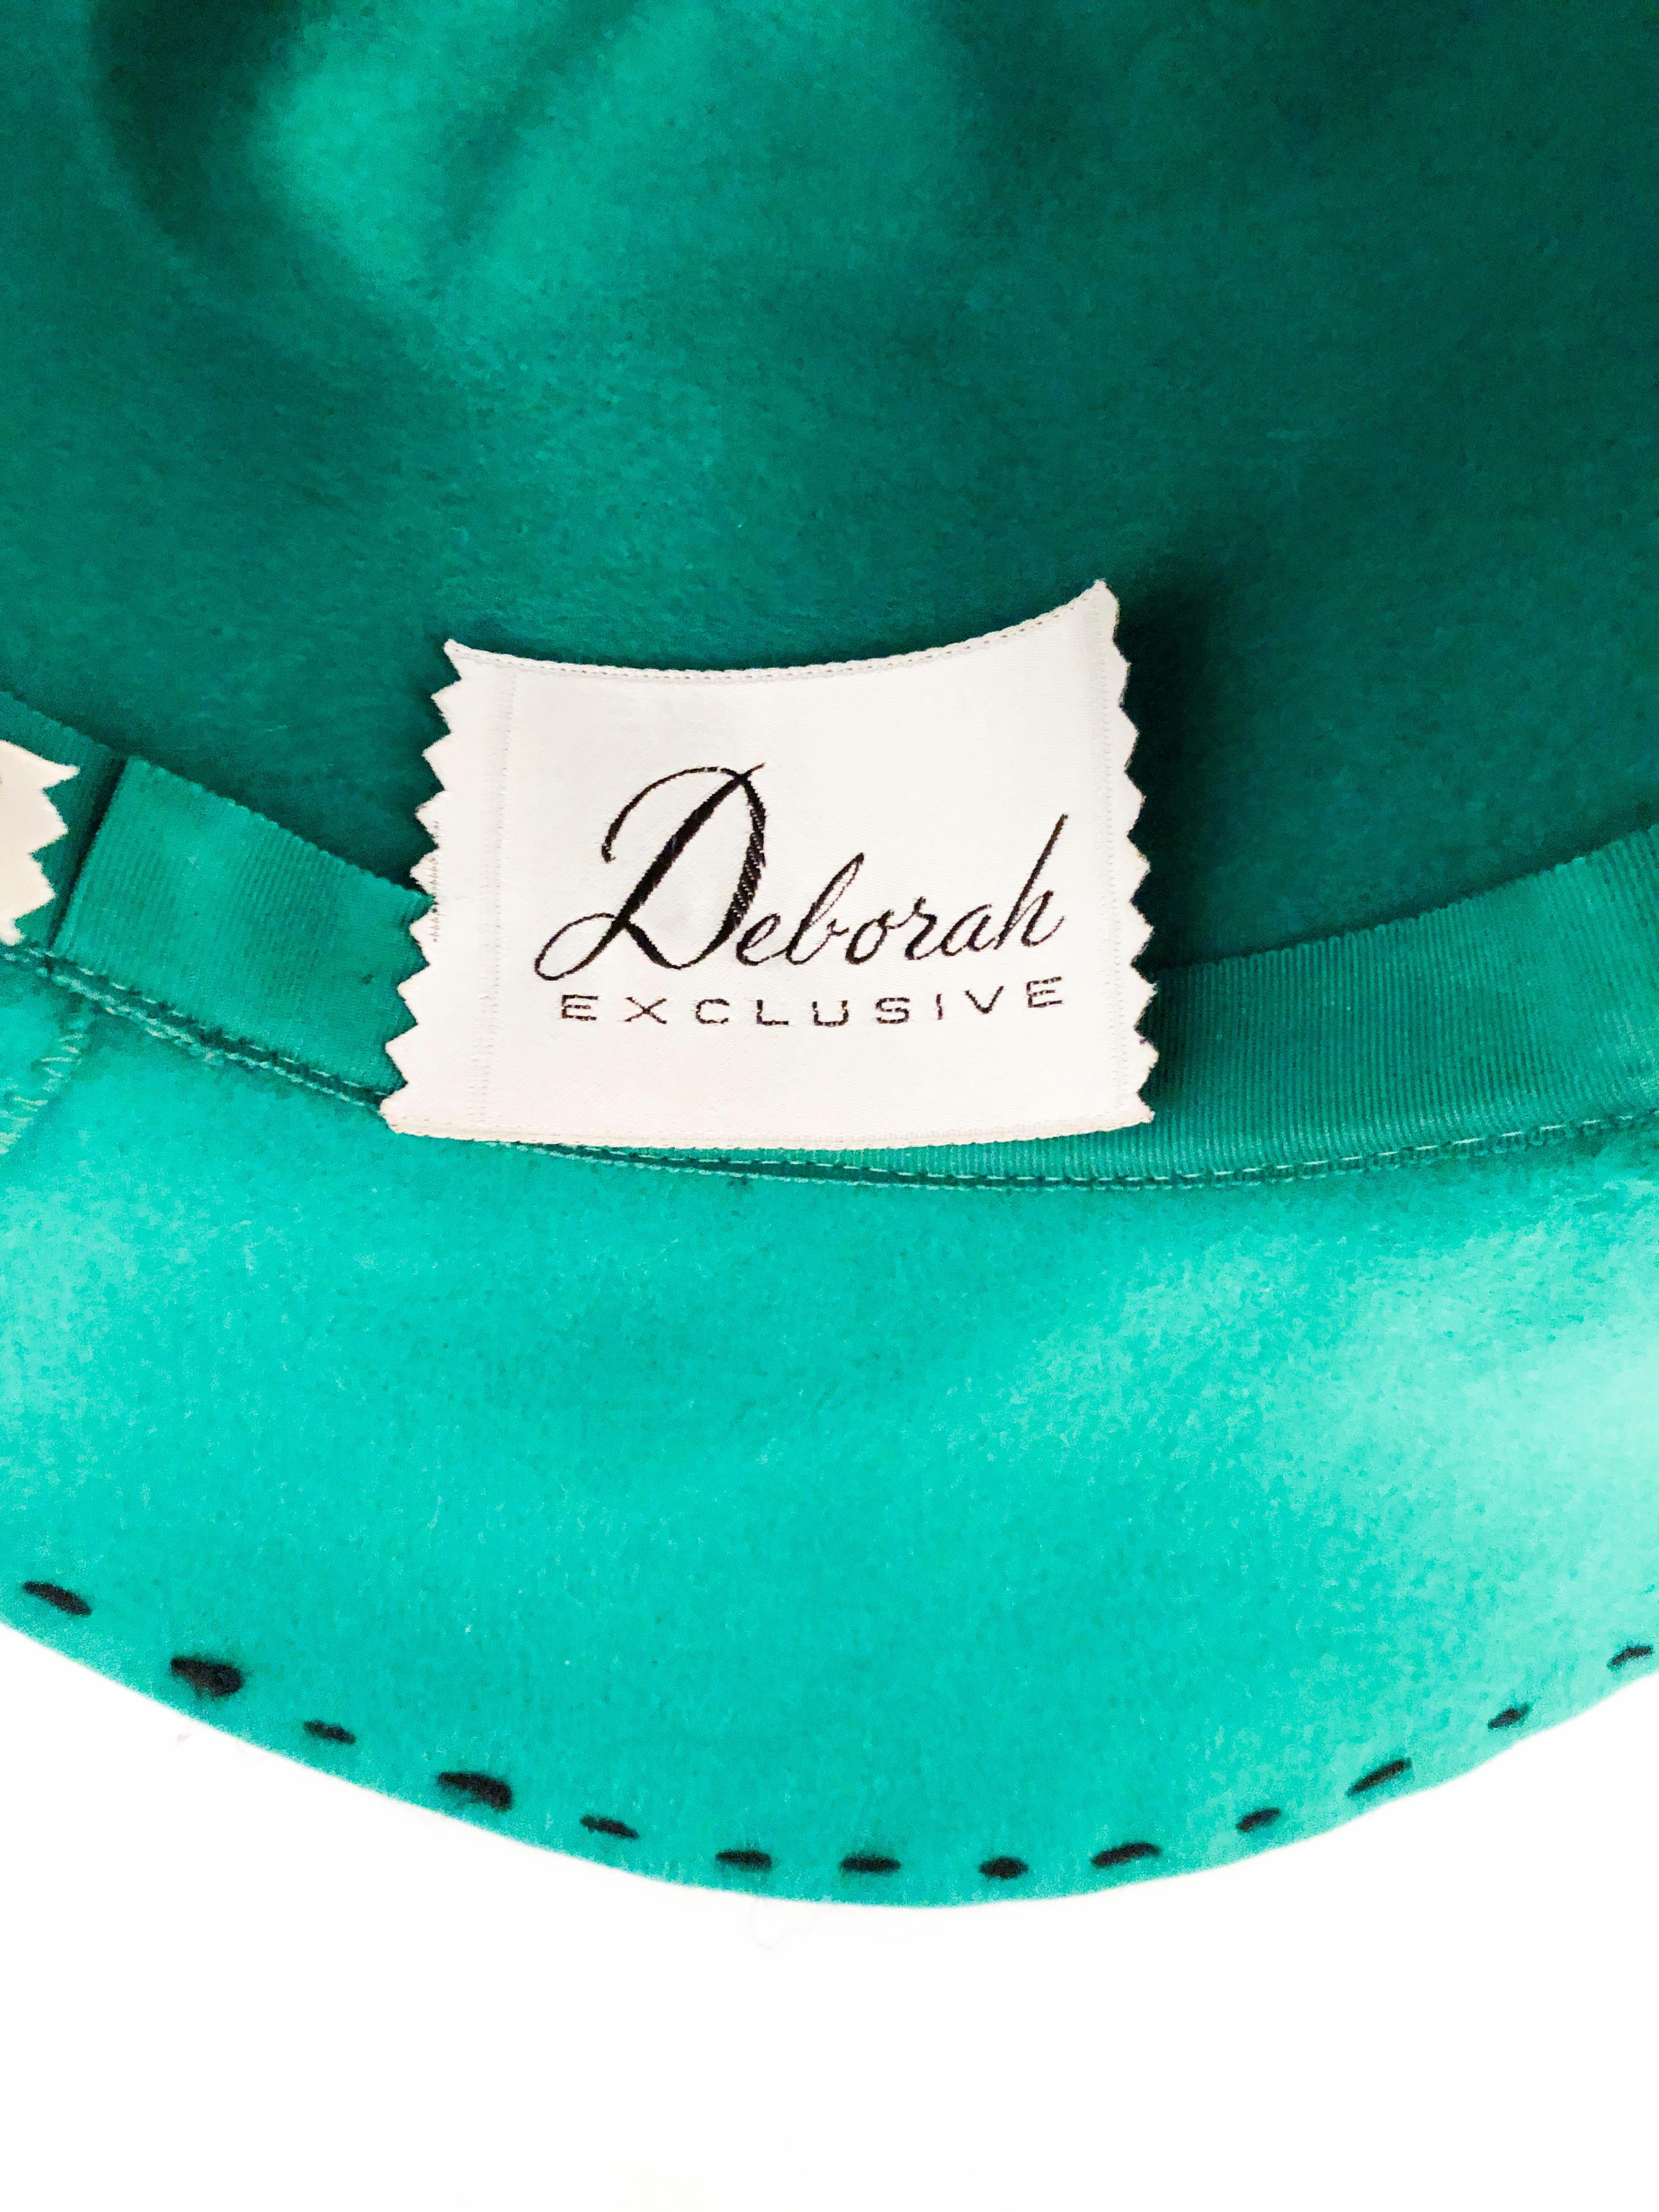 1970s Deborah Teal/Green rabbit Hat with Black Topstitch and Faux Leather Band In Good Condition For Sale In San Francisco, CA